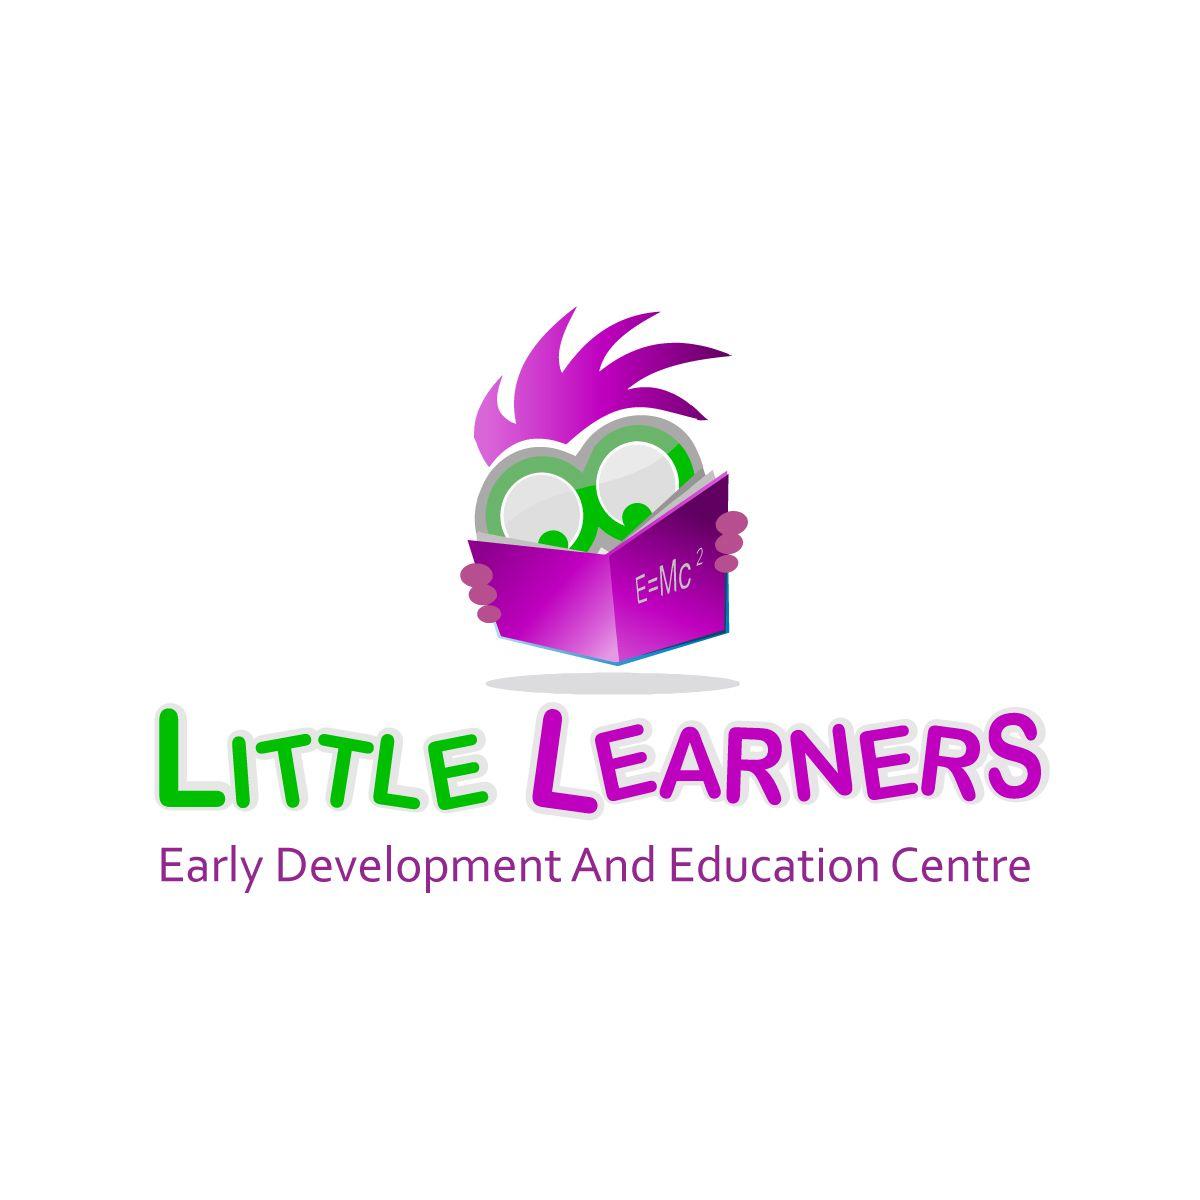 Maximal Logo - Bold, Playful, Education Logo Design for Little Learners Early